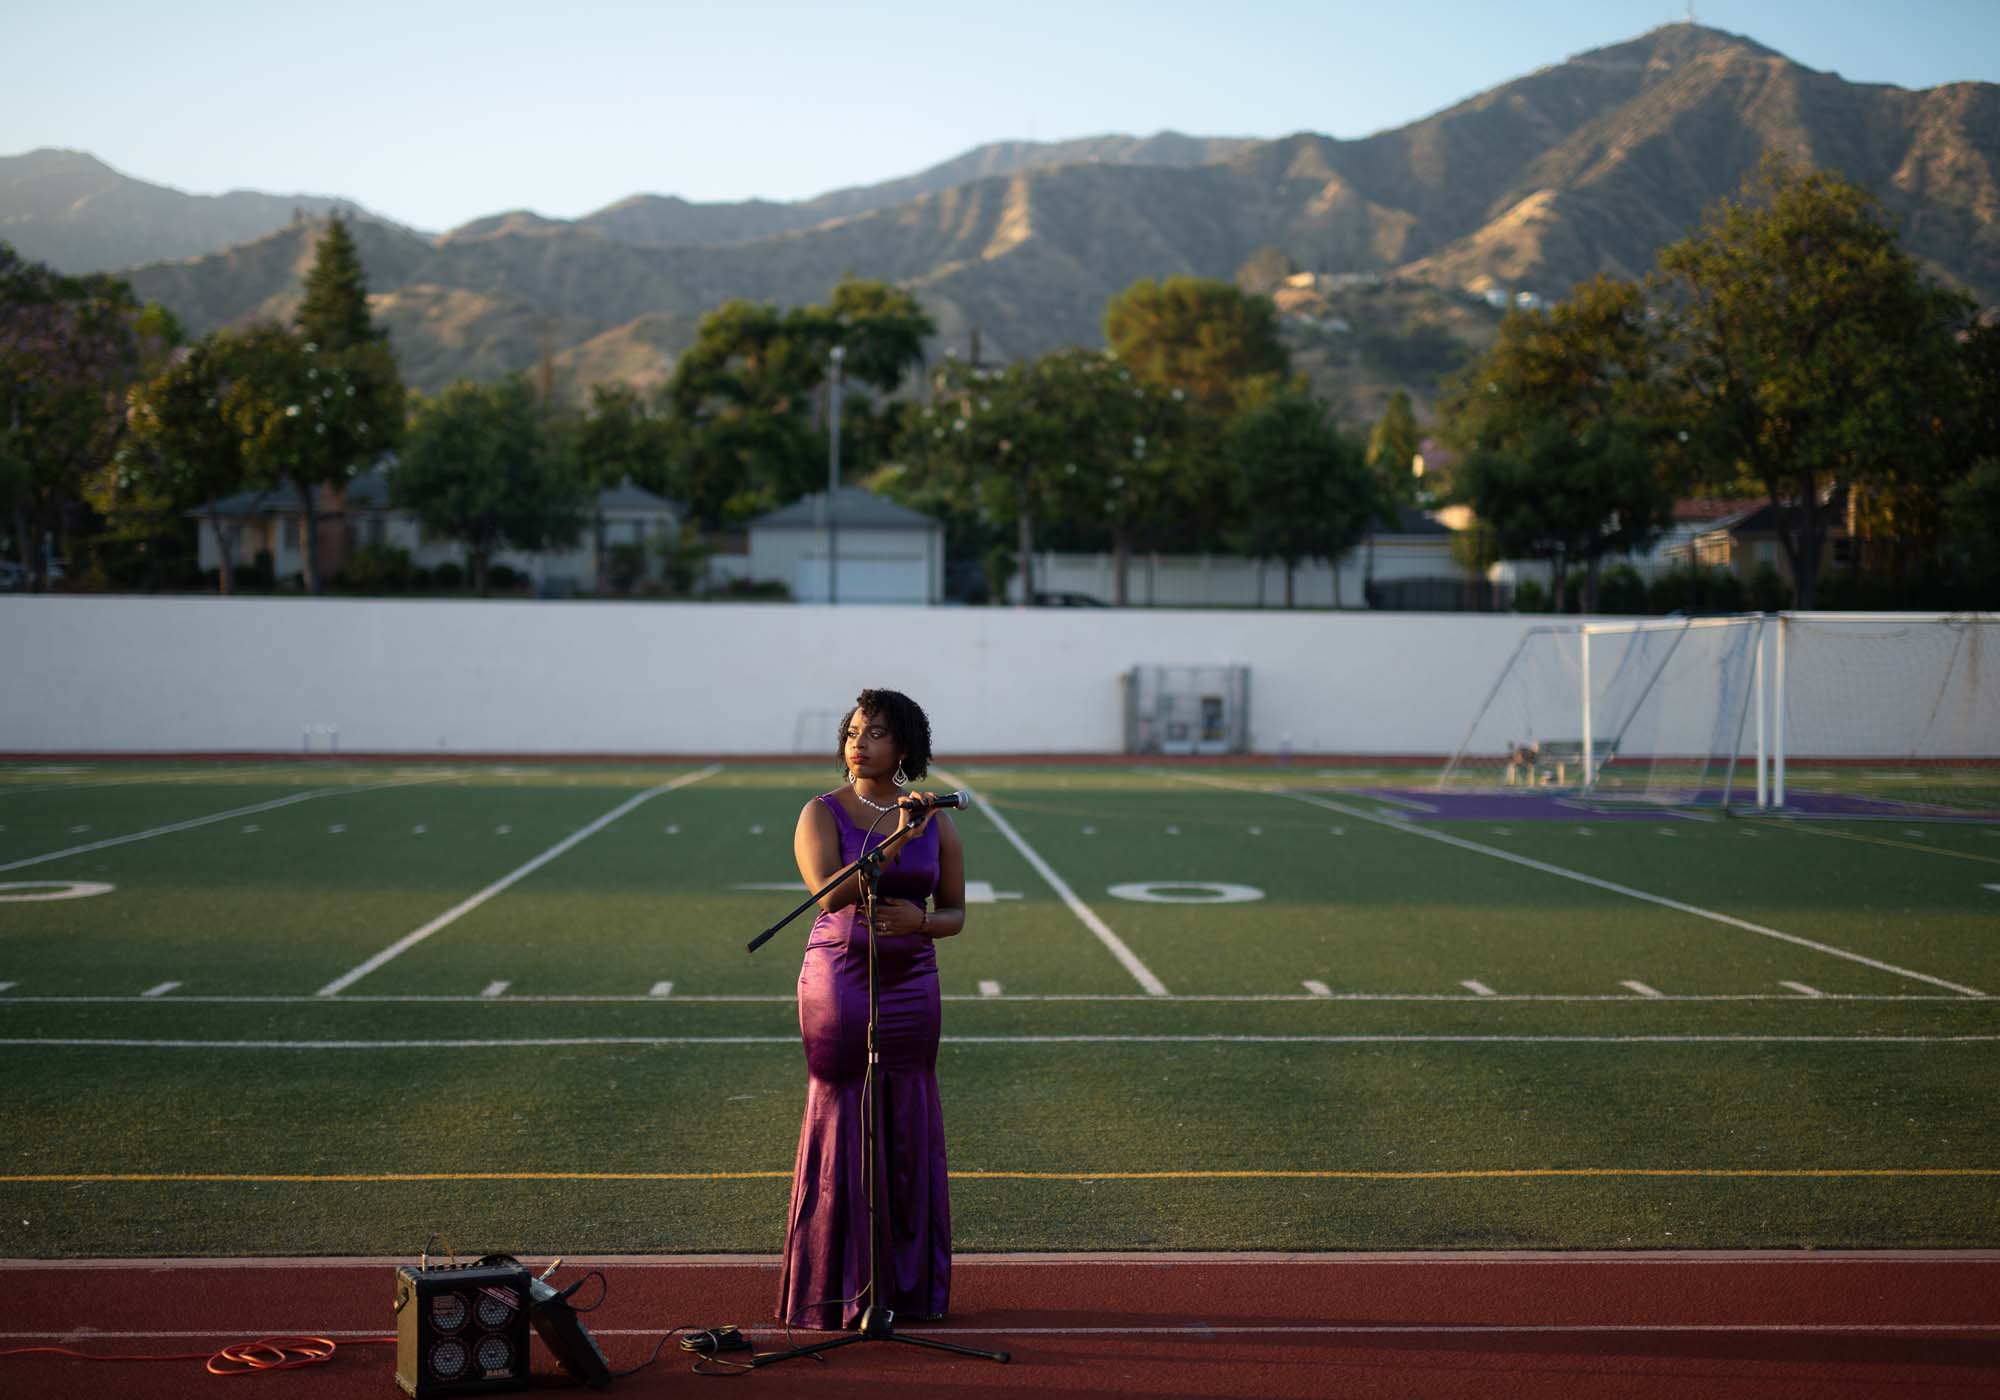 Katrina Manor, pictured in the Glendale's Hoover High School stadium, where she would have sung during graduation ceremonies. She explained that having the end of her senior year derailed has been flush with emotion.